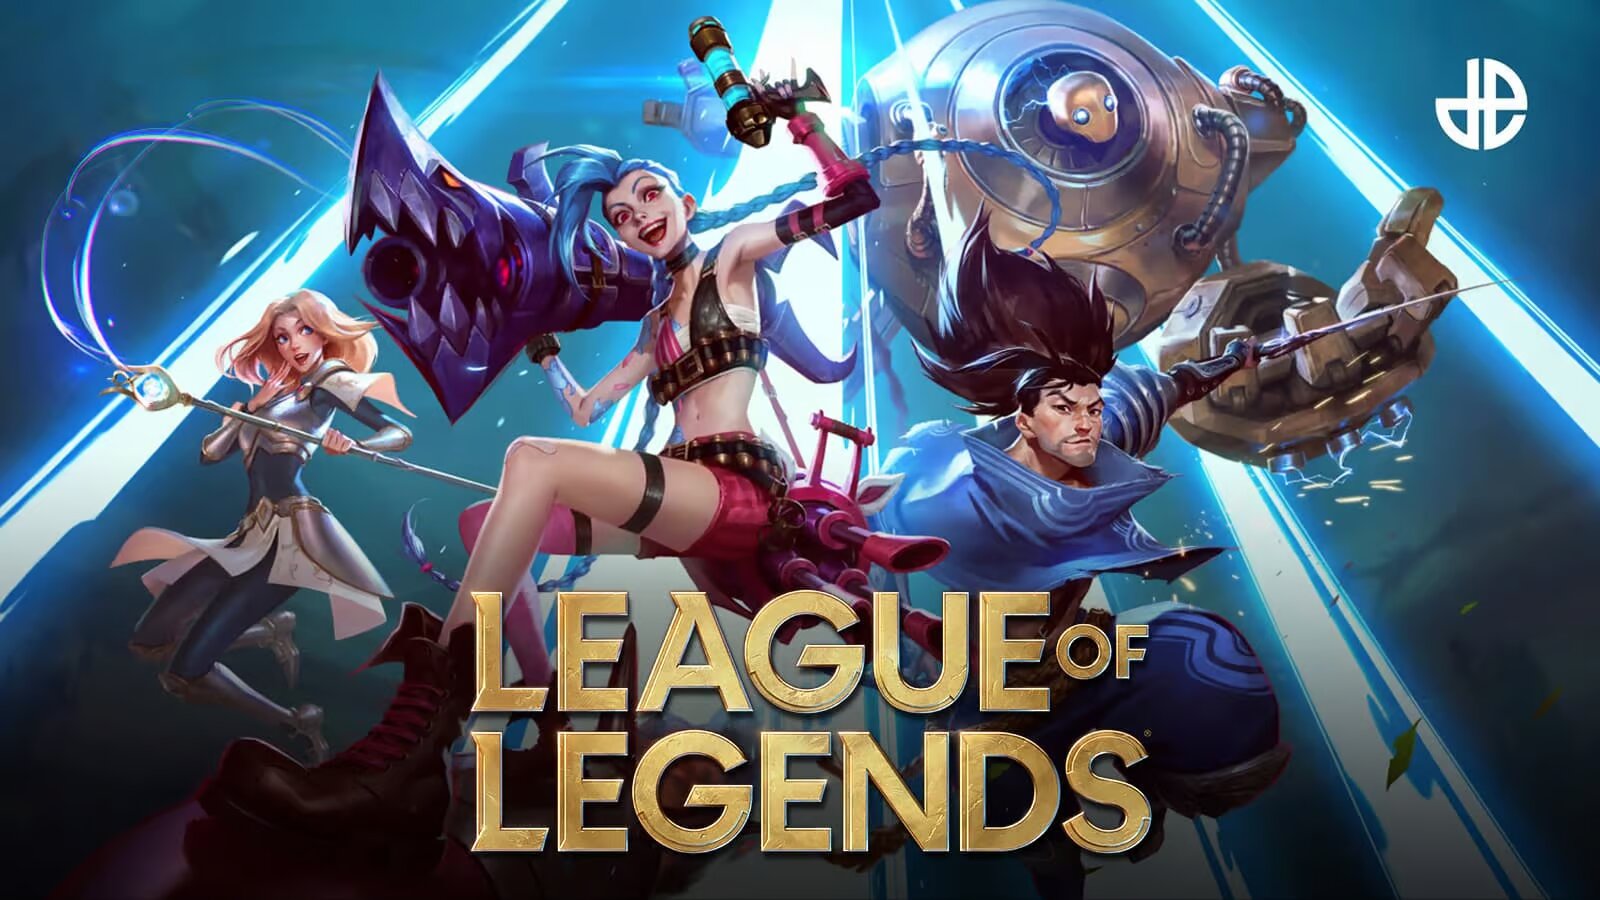 2021 - The Year of League of Legends